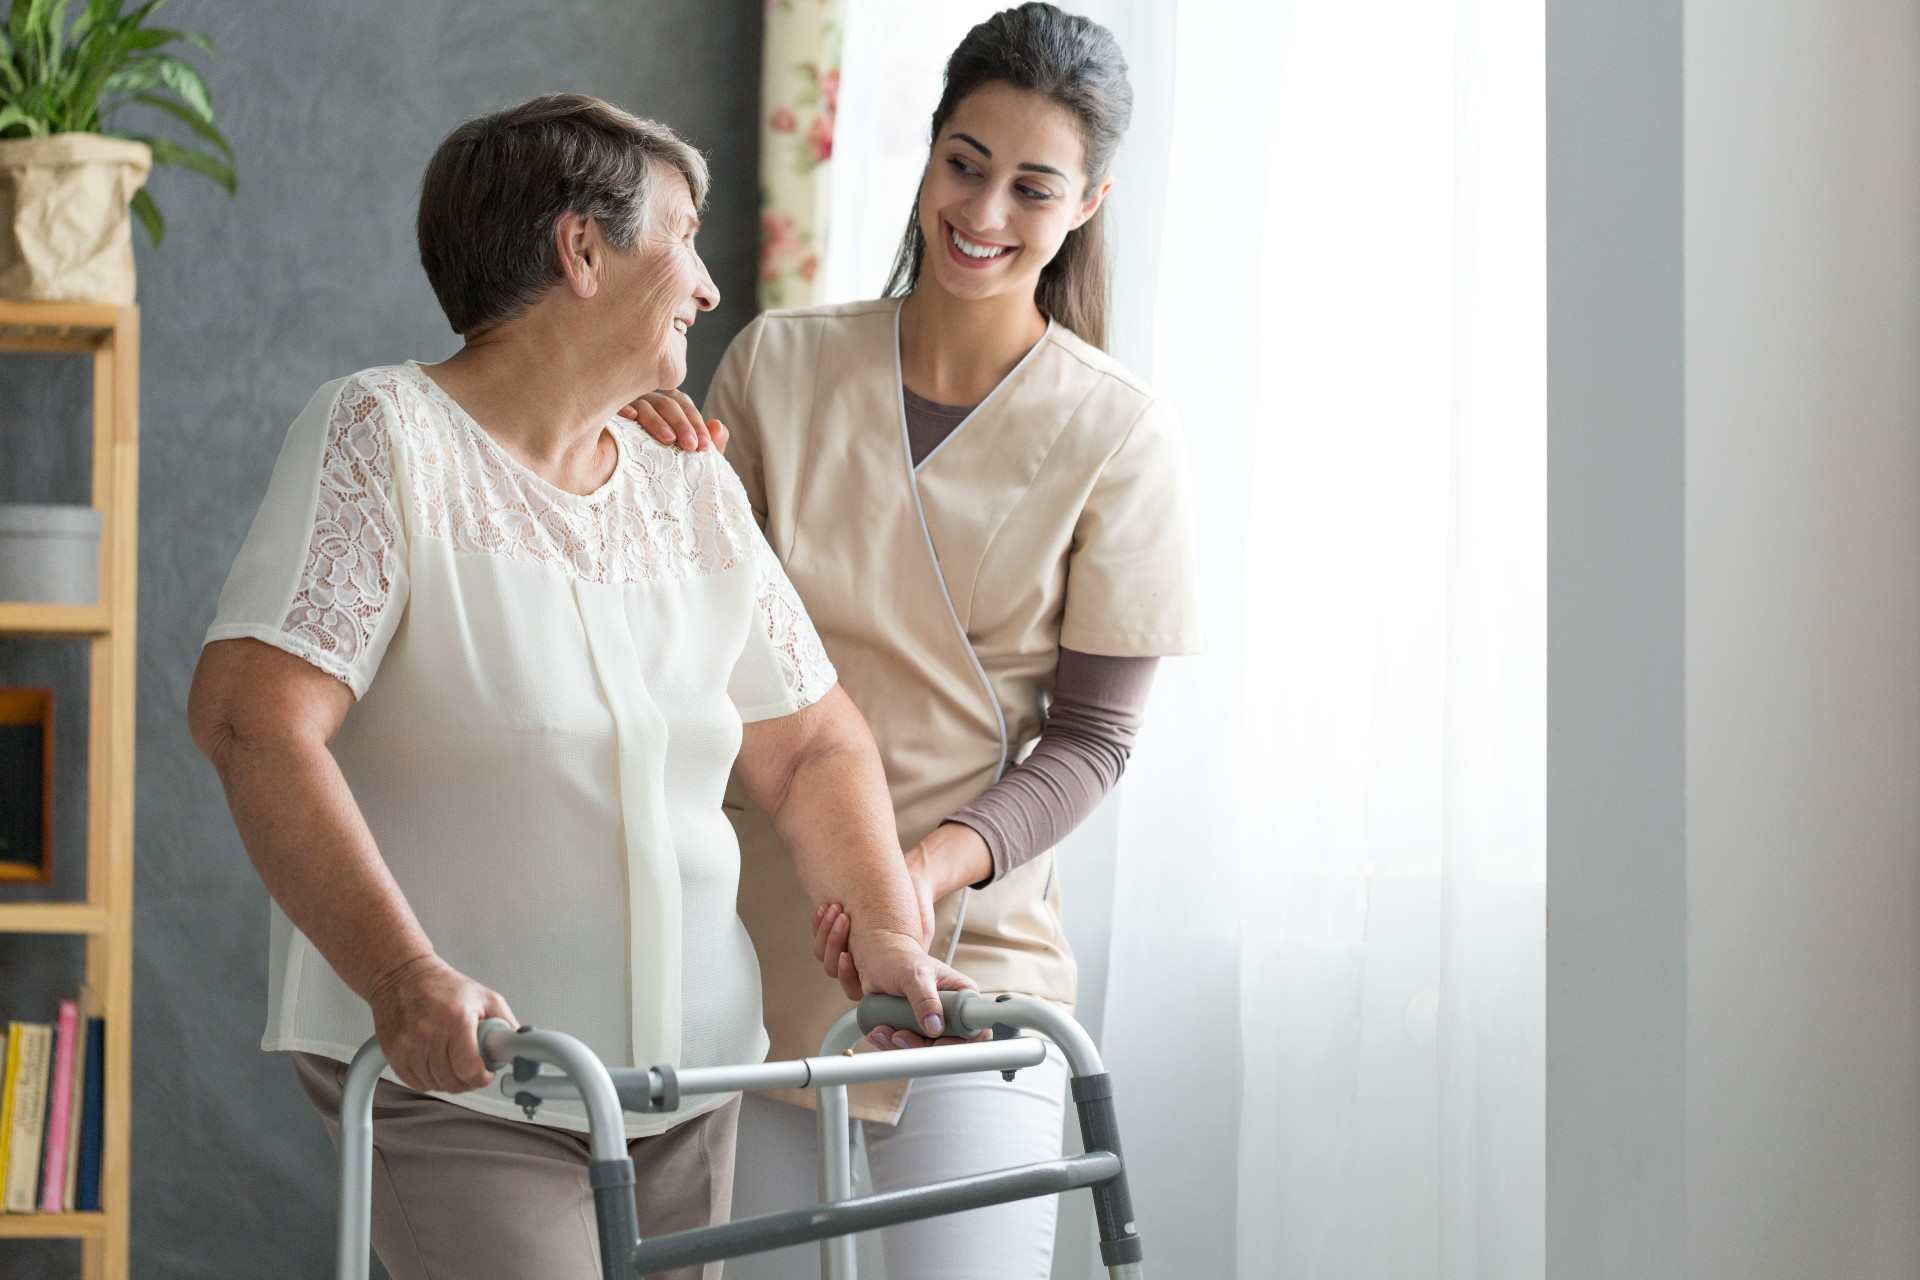 A senior woman walks with assistance from a health care staff member.